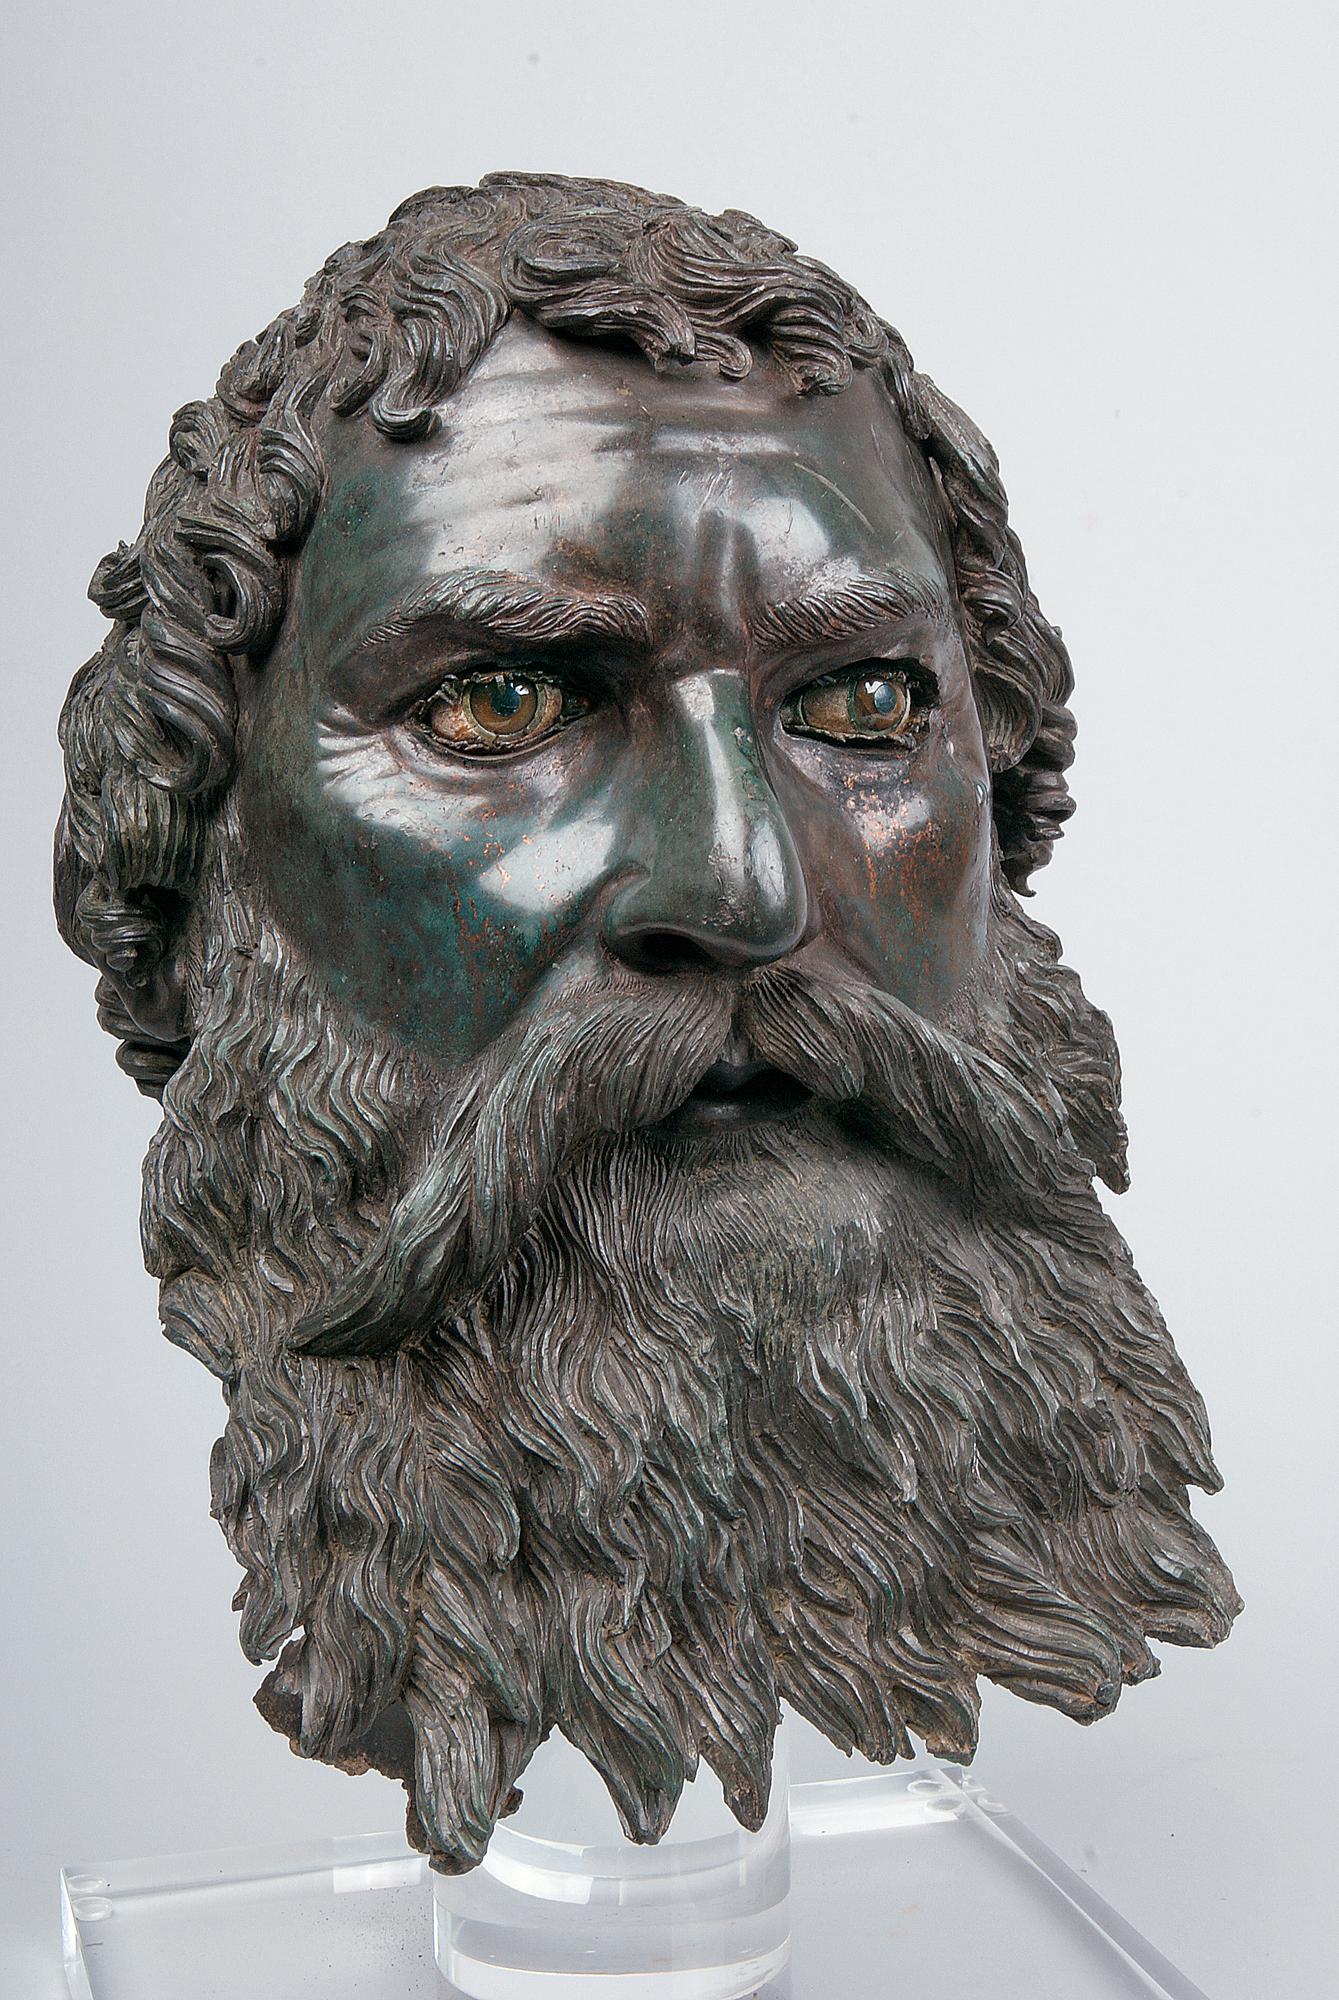 2320 years old bronze head of the Thracian king Seuthes III, now housed at the National Museum of Archeology in Sofia, Bulgaria.jpg